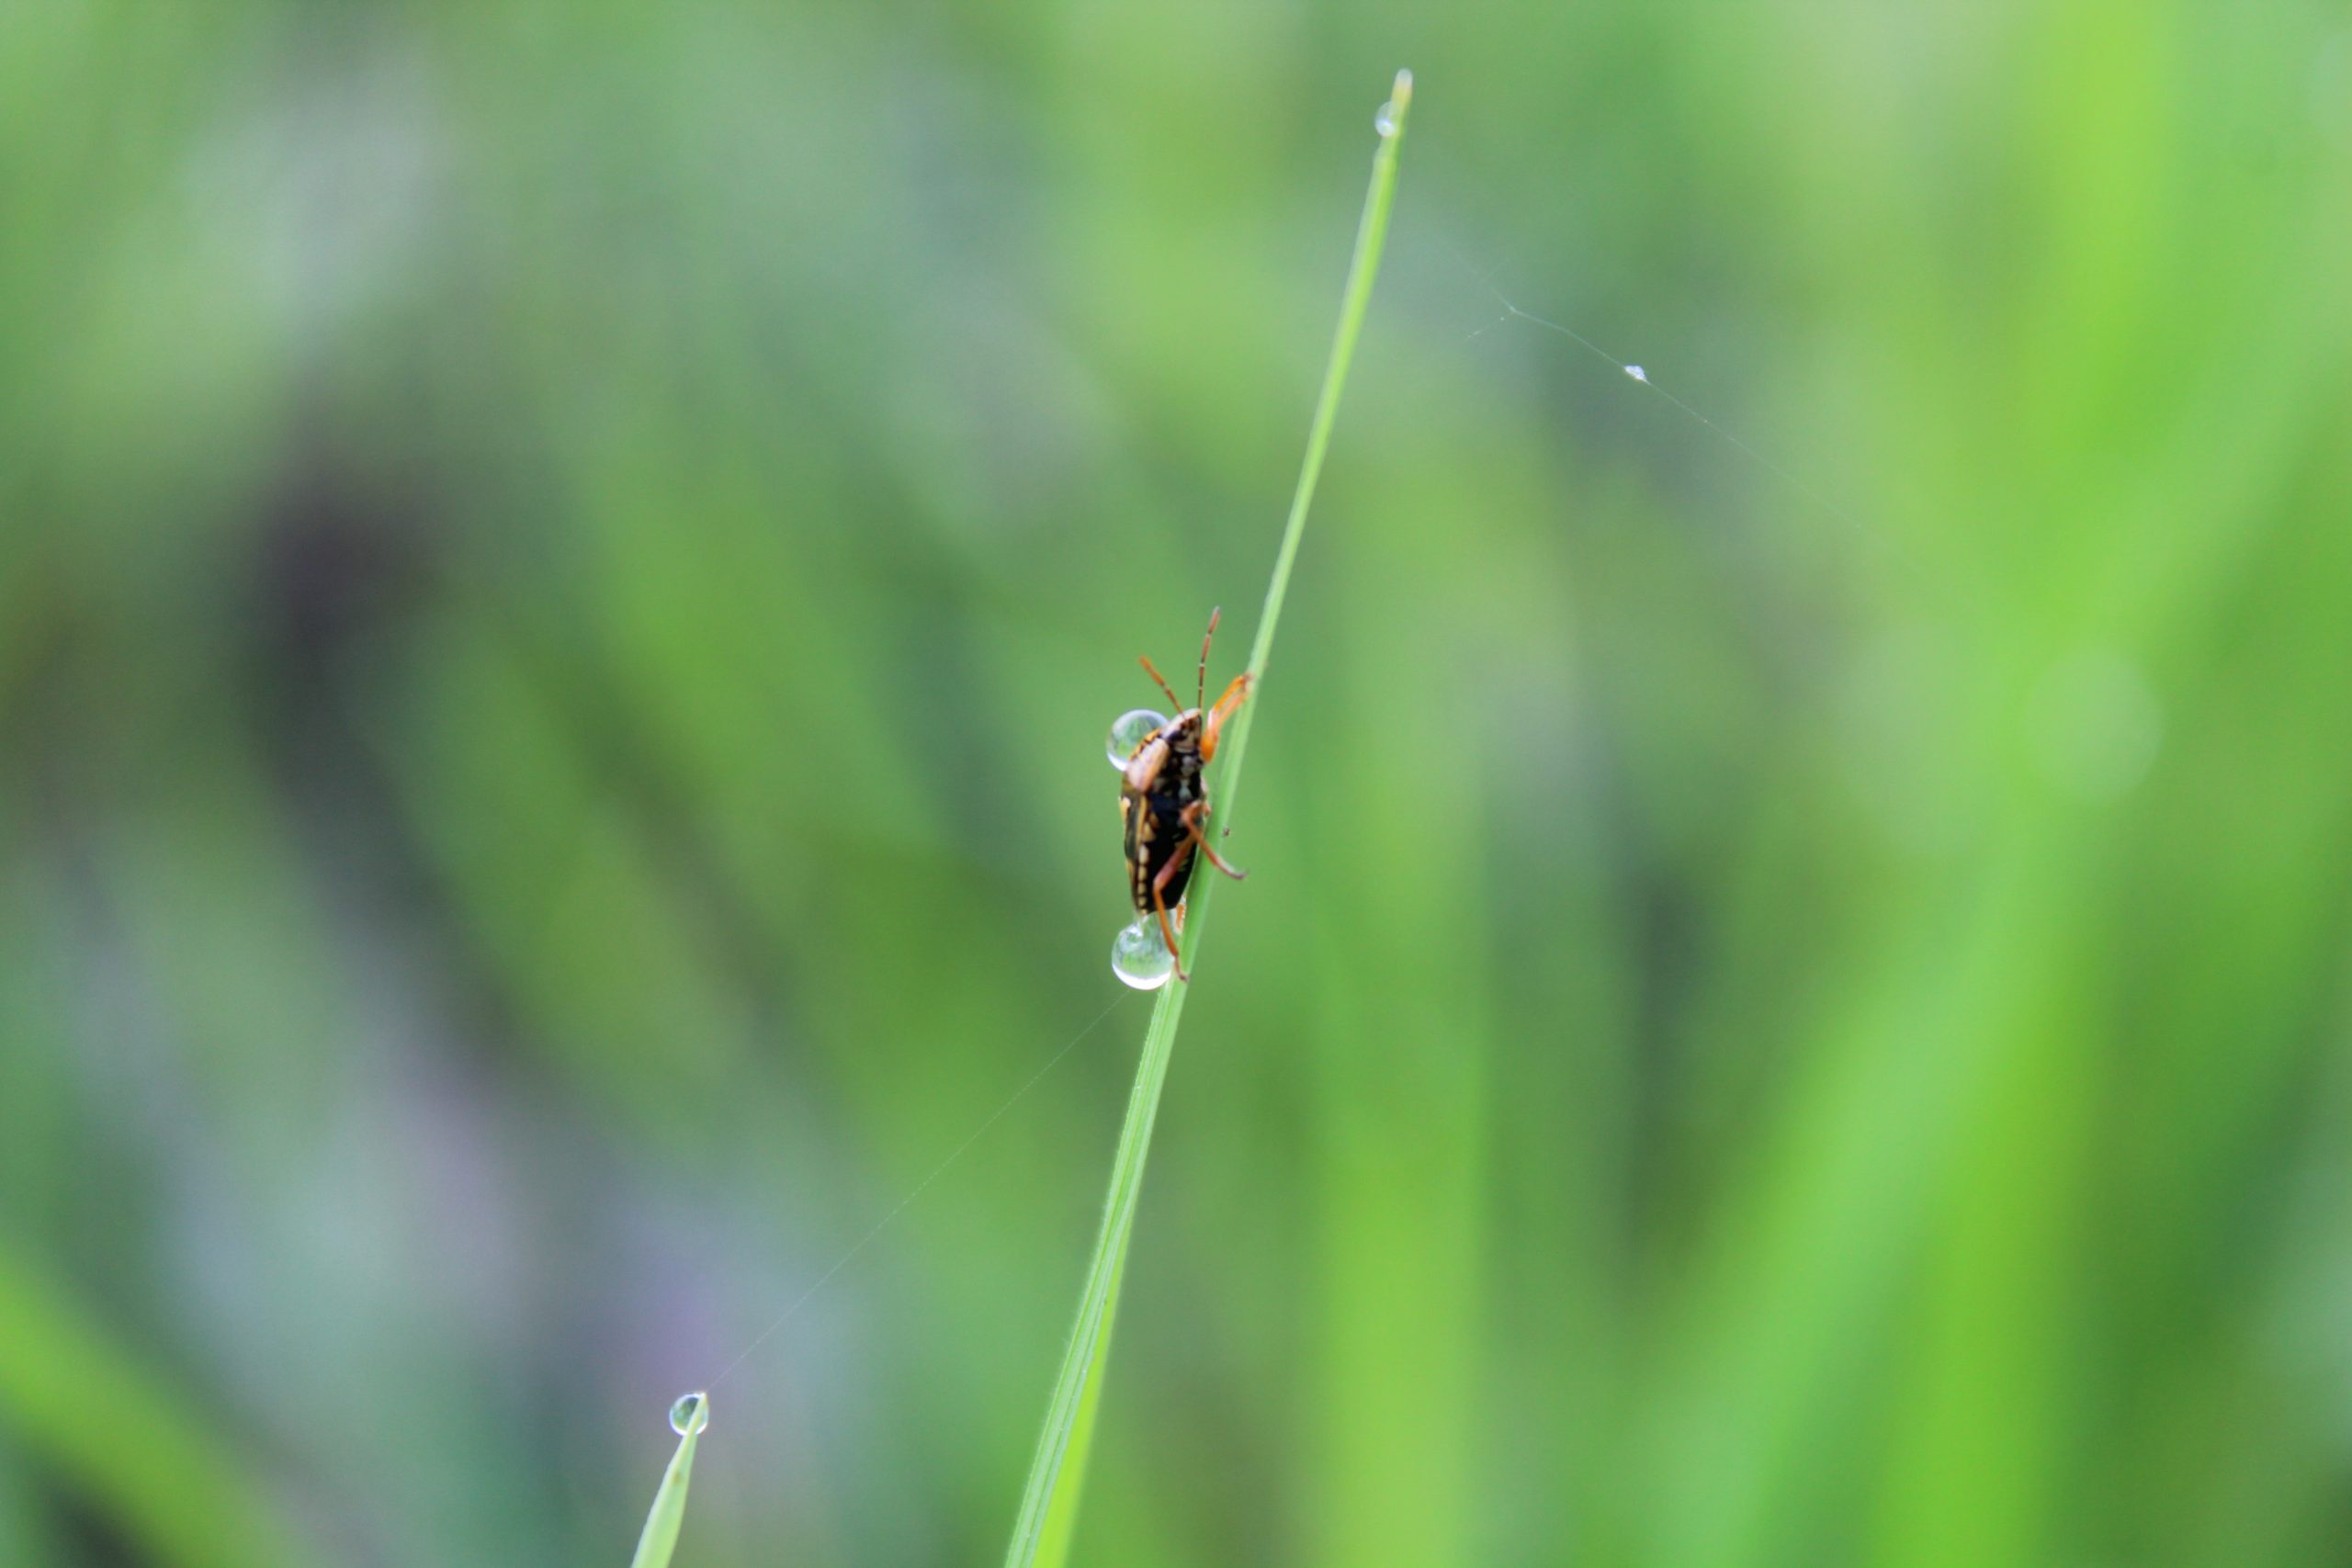 Insect on a grass straw